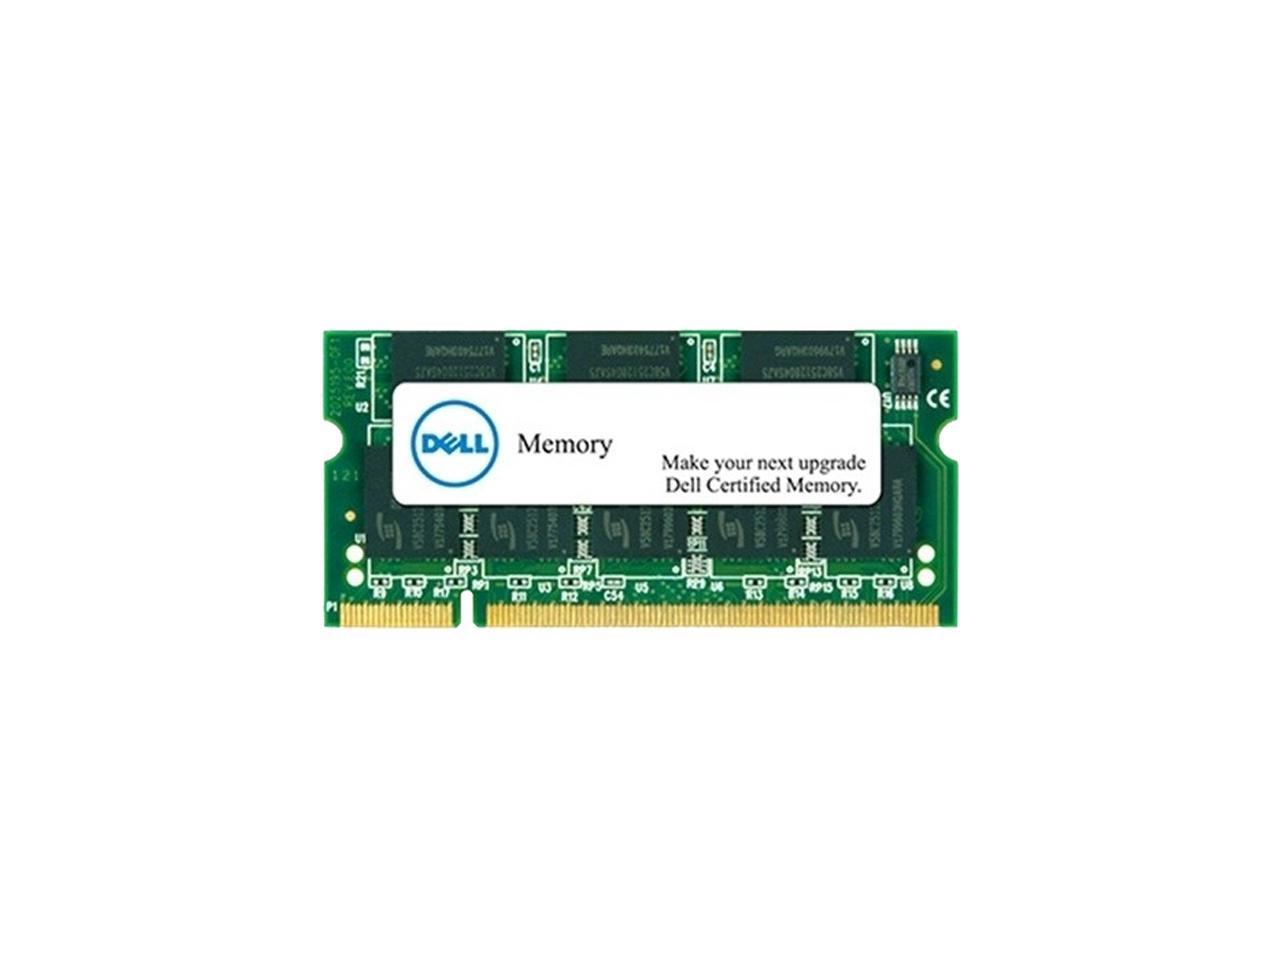 Dell 8GB 204-Pin DDR3 SO-DIMM DDR3 1600 (PC3 12800) Notebook Memory Model SNPN2M64C/8G